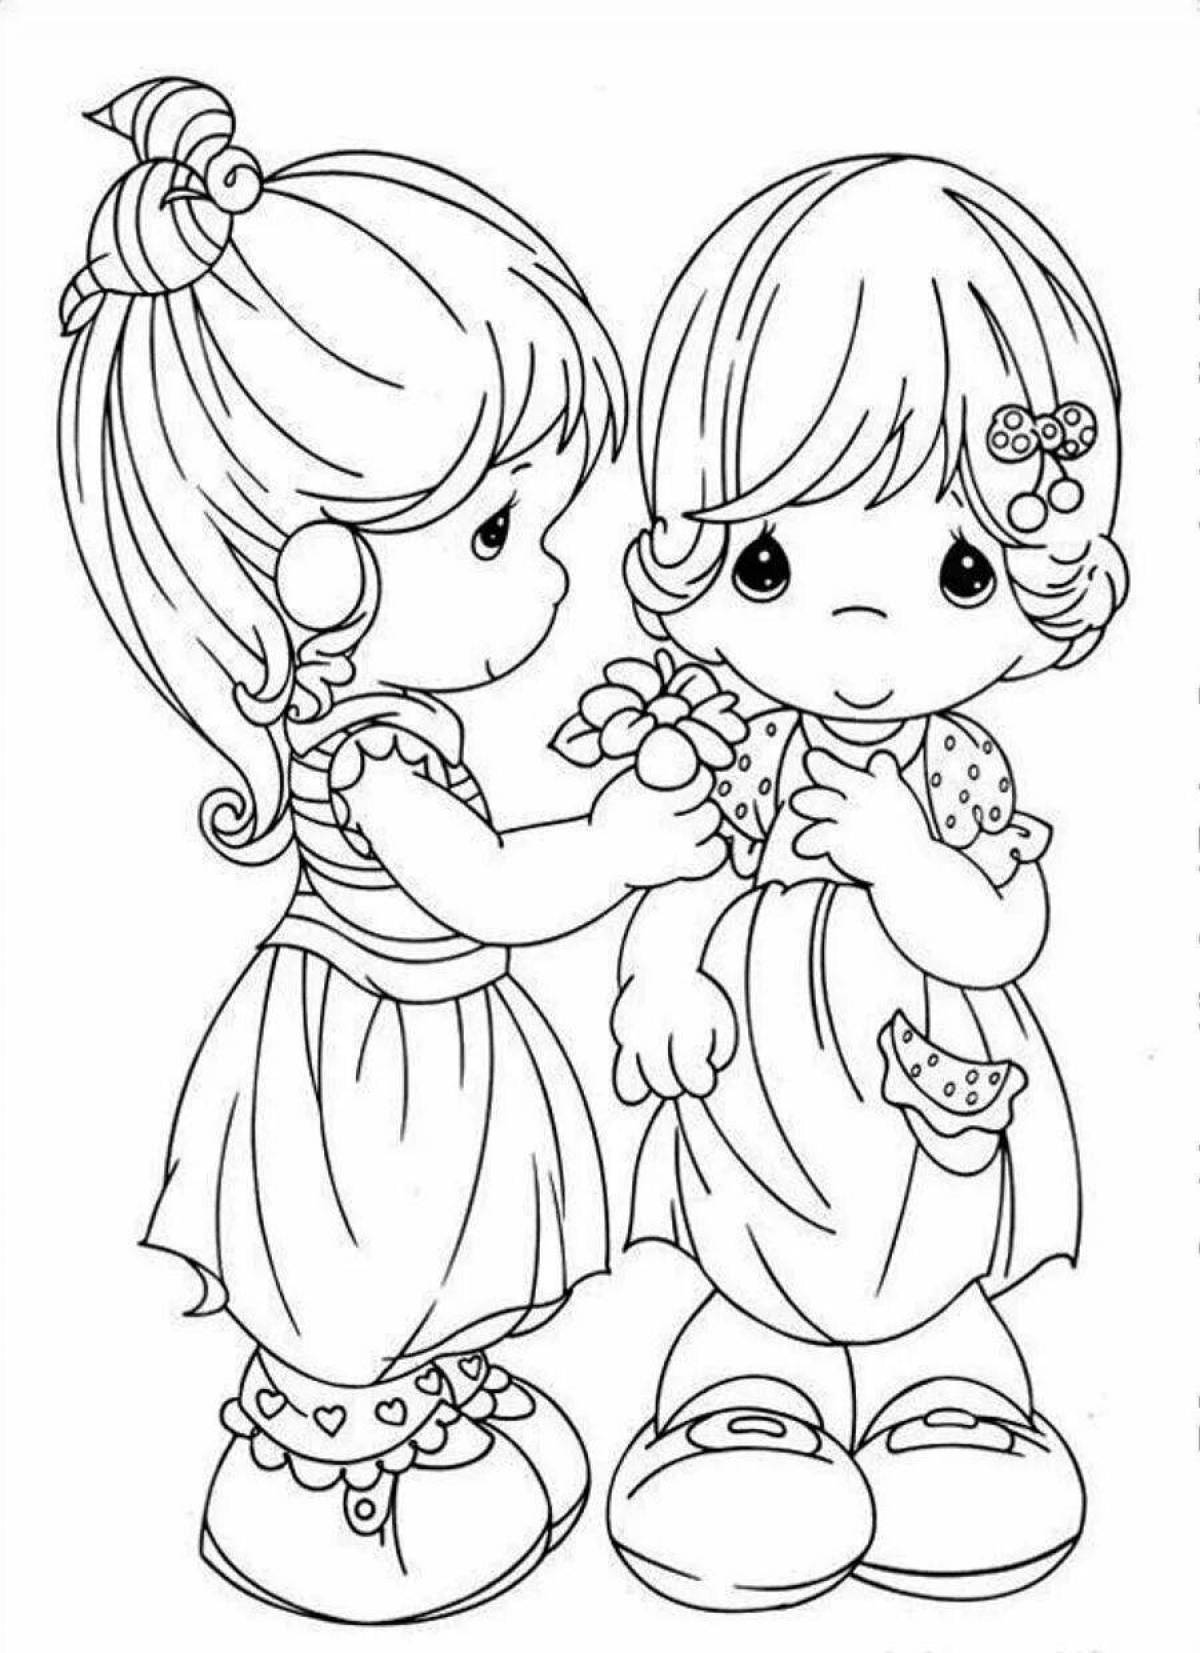 Fun coloring pages for couples